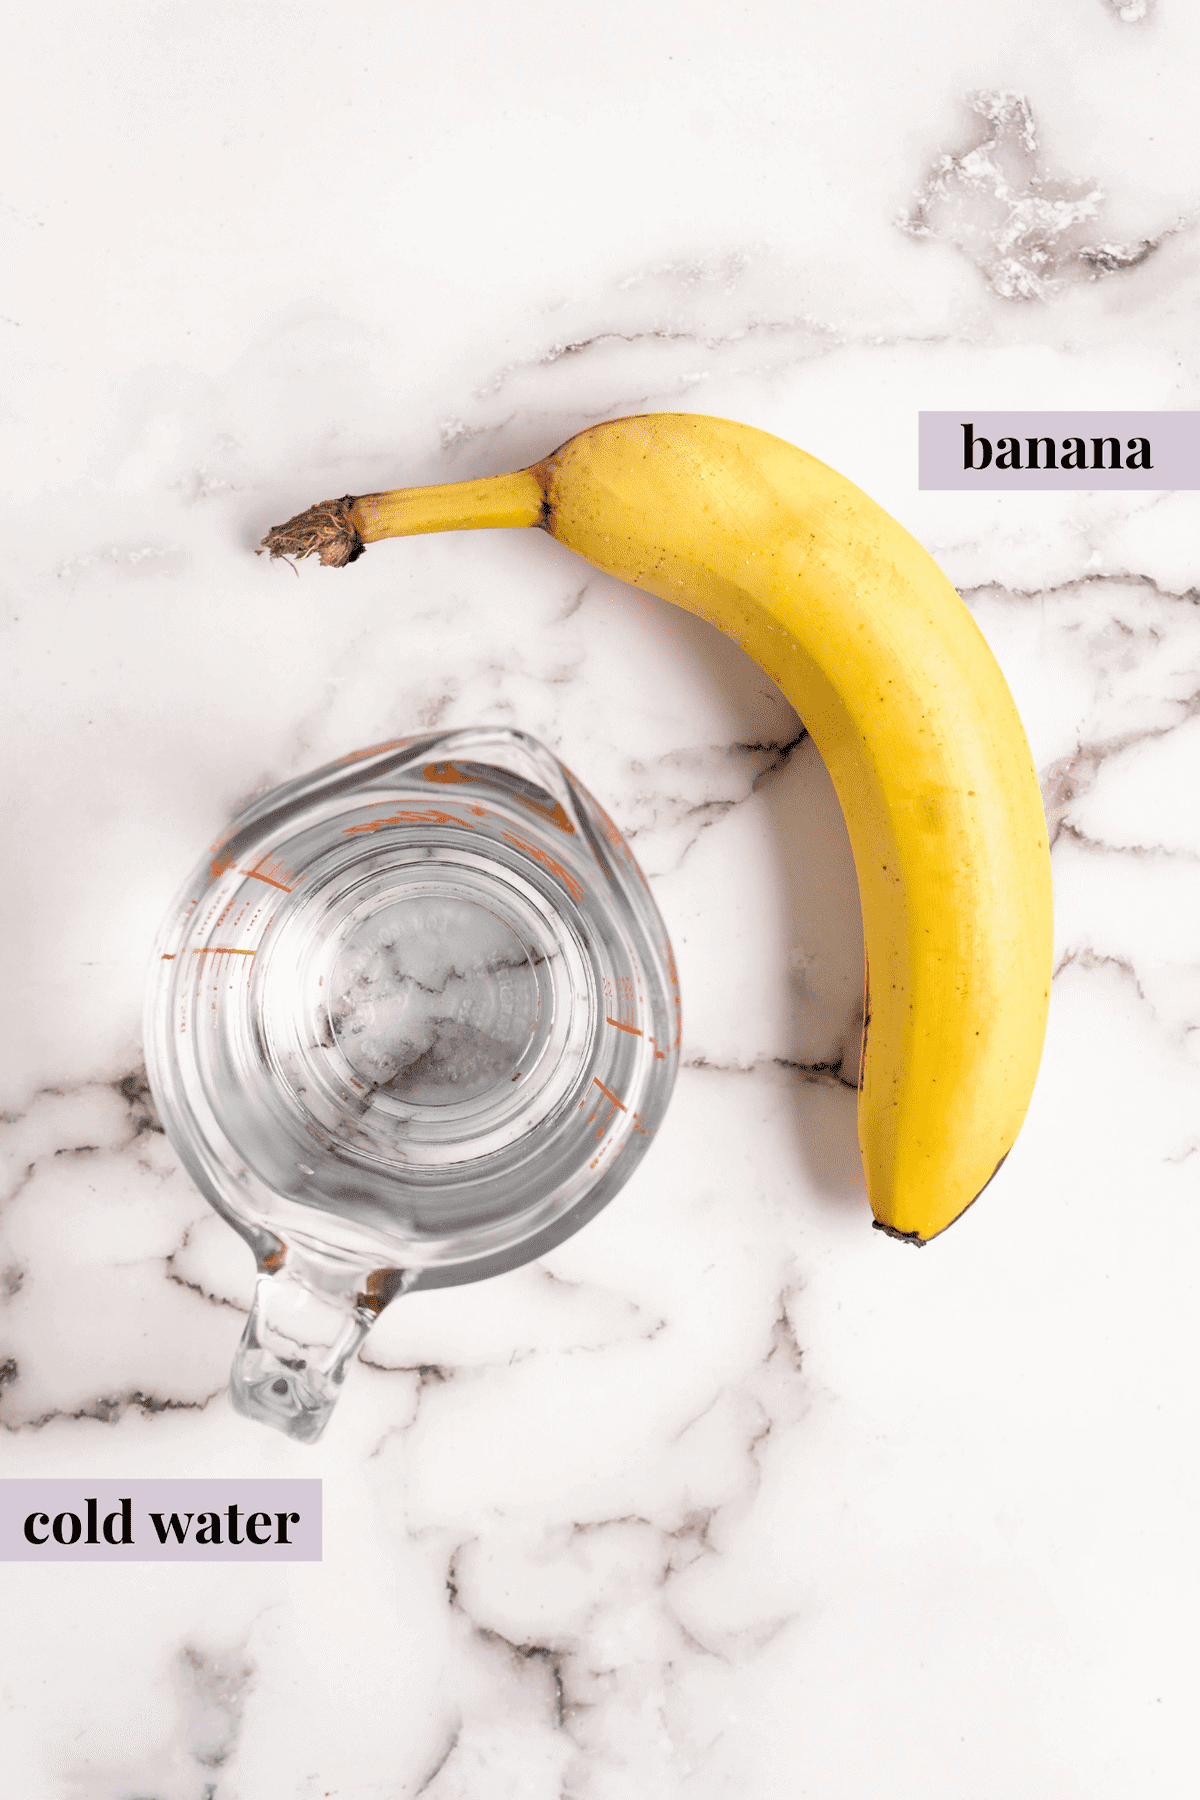 Overhead view of water and banana